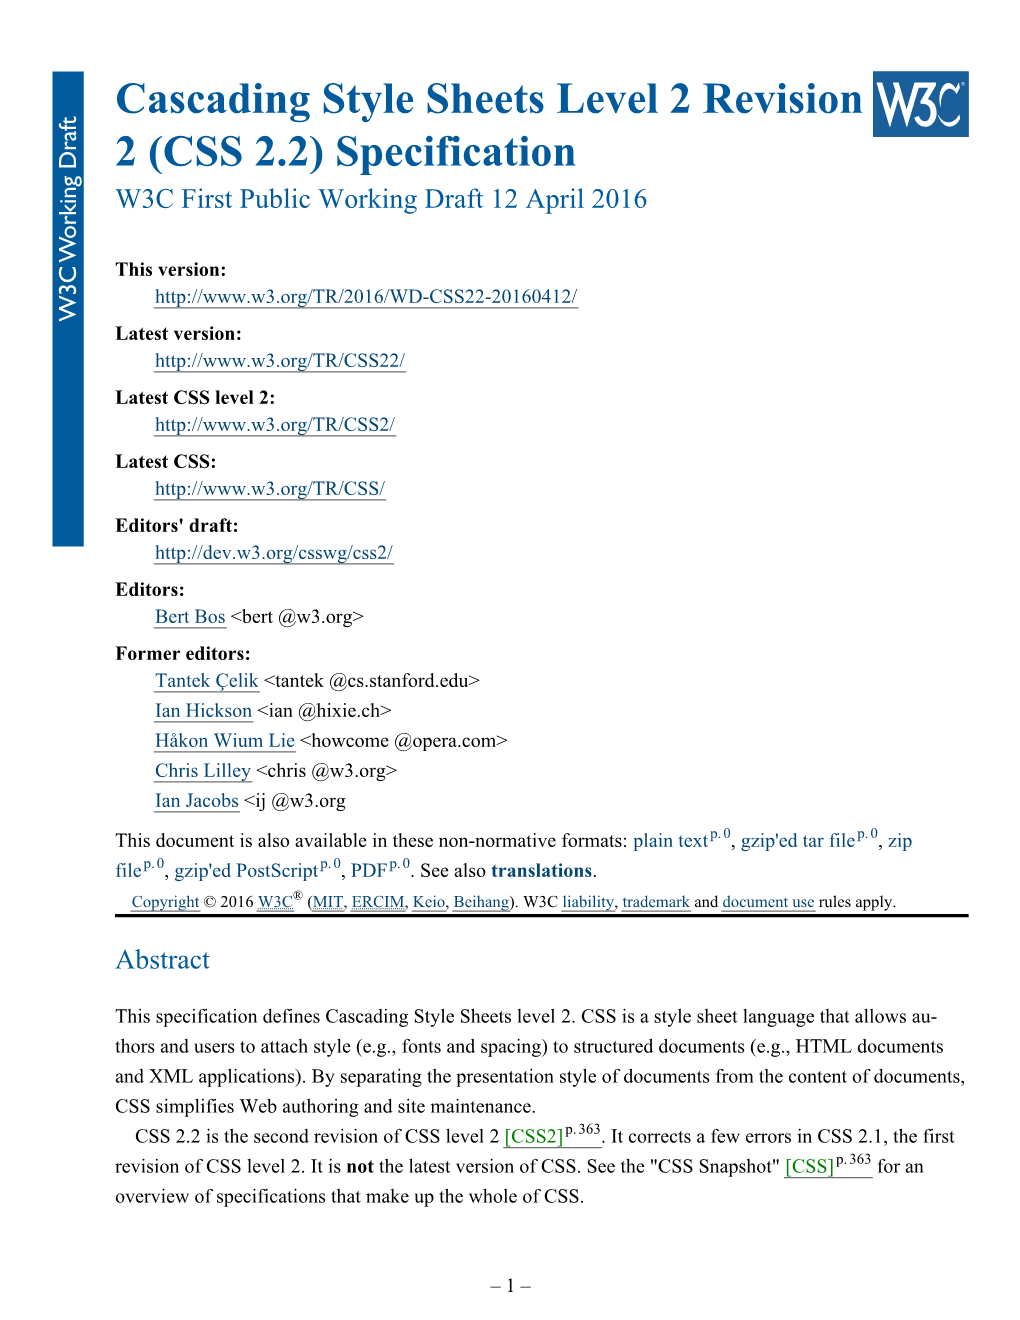 Cascading Style Sheets Level 2 Revision 2 (CSS 2.2) Specification W3C First Public Working Draft 12 April 2016